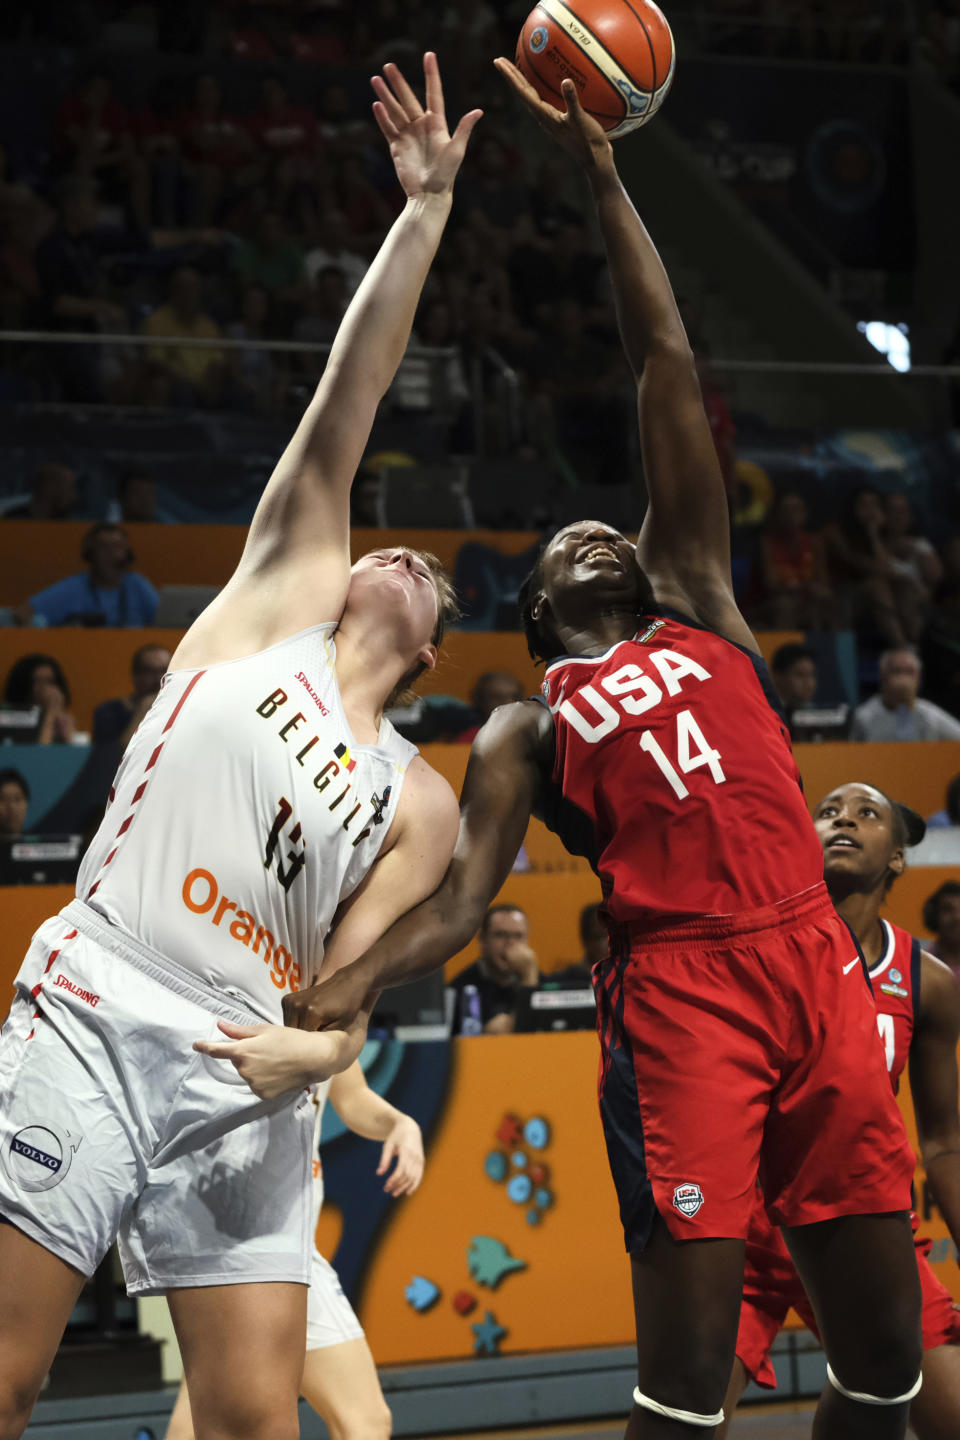 Kyara Linskens of the Belgian fights for a rebound against Tina Charles of the United States during the Women's basketball World Cup semi final match between Belgium and the U.S.A. in Tenerife, Spain, Saturday Sept. 29, 2018. (AP Photo Andres Gutierrez)